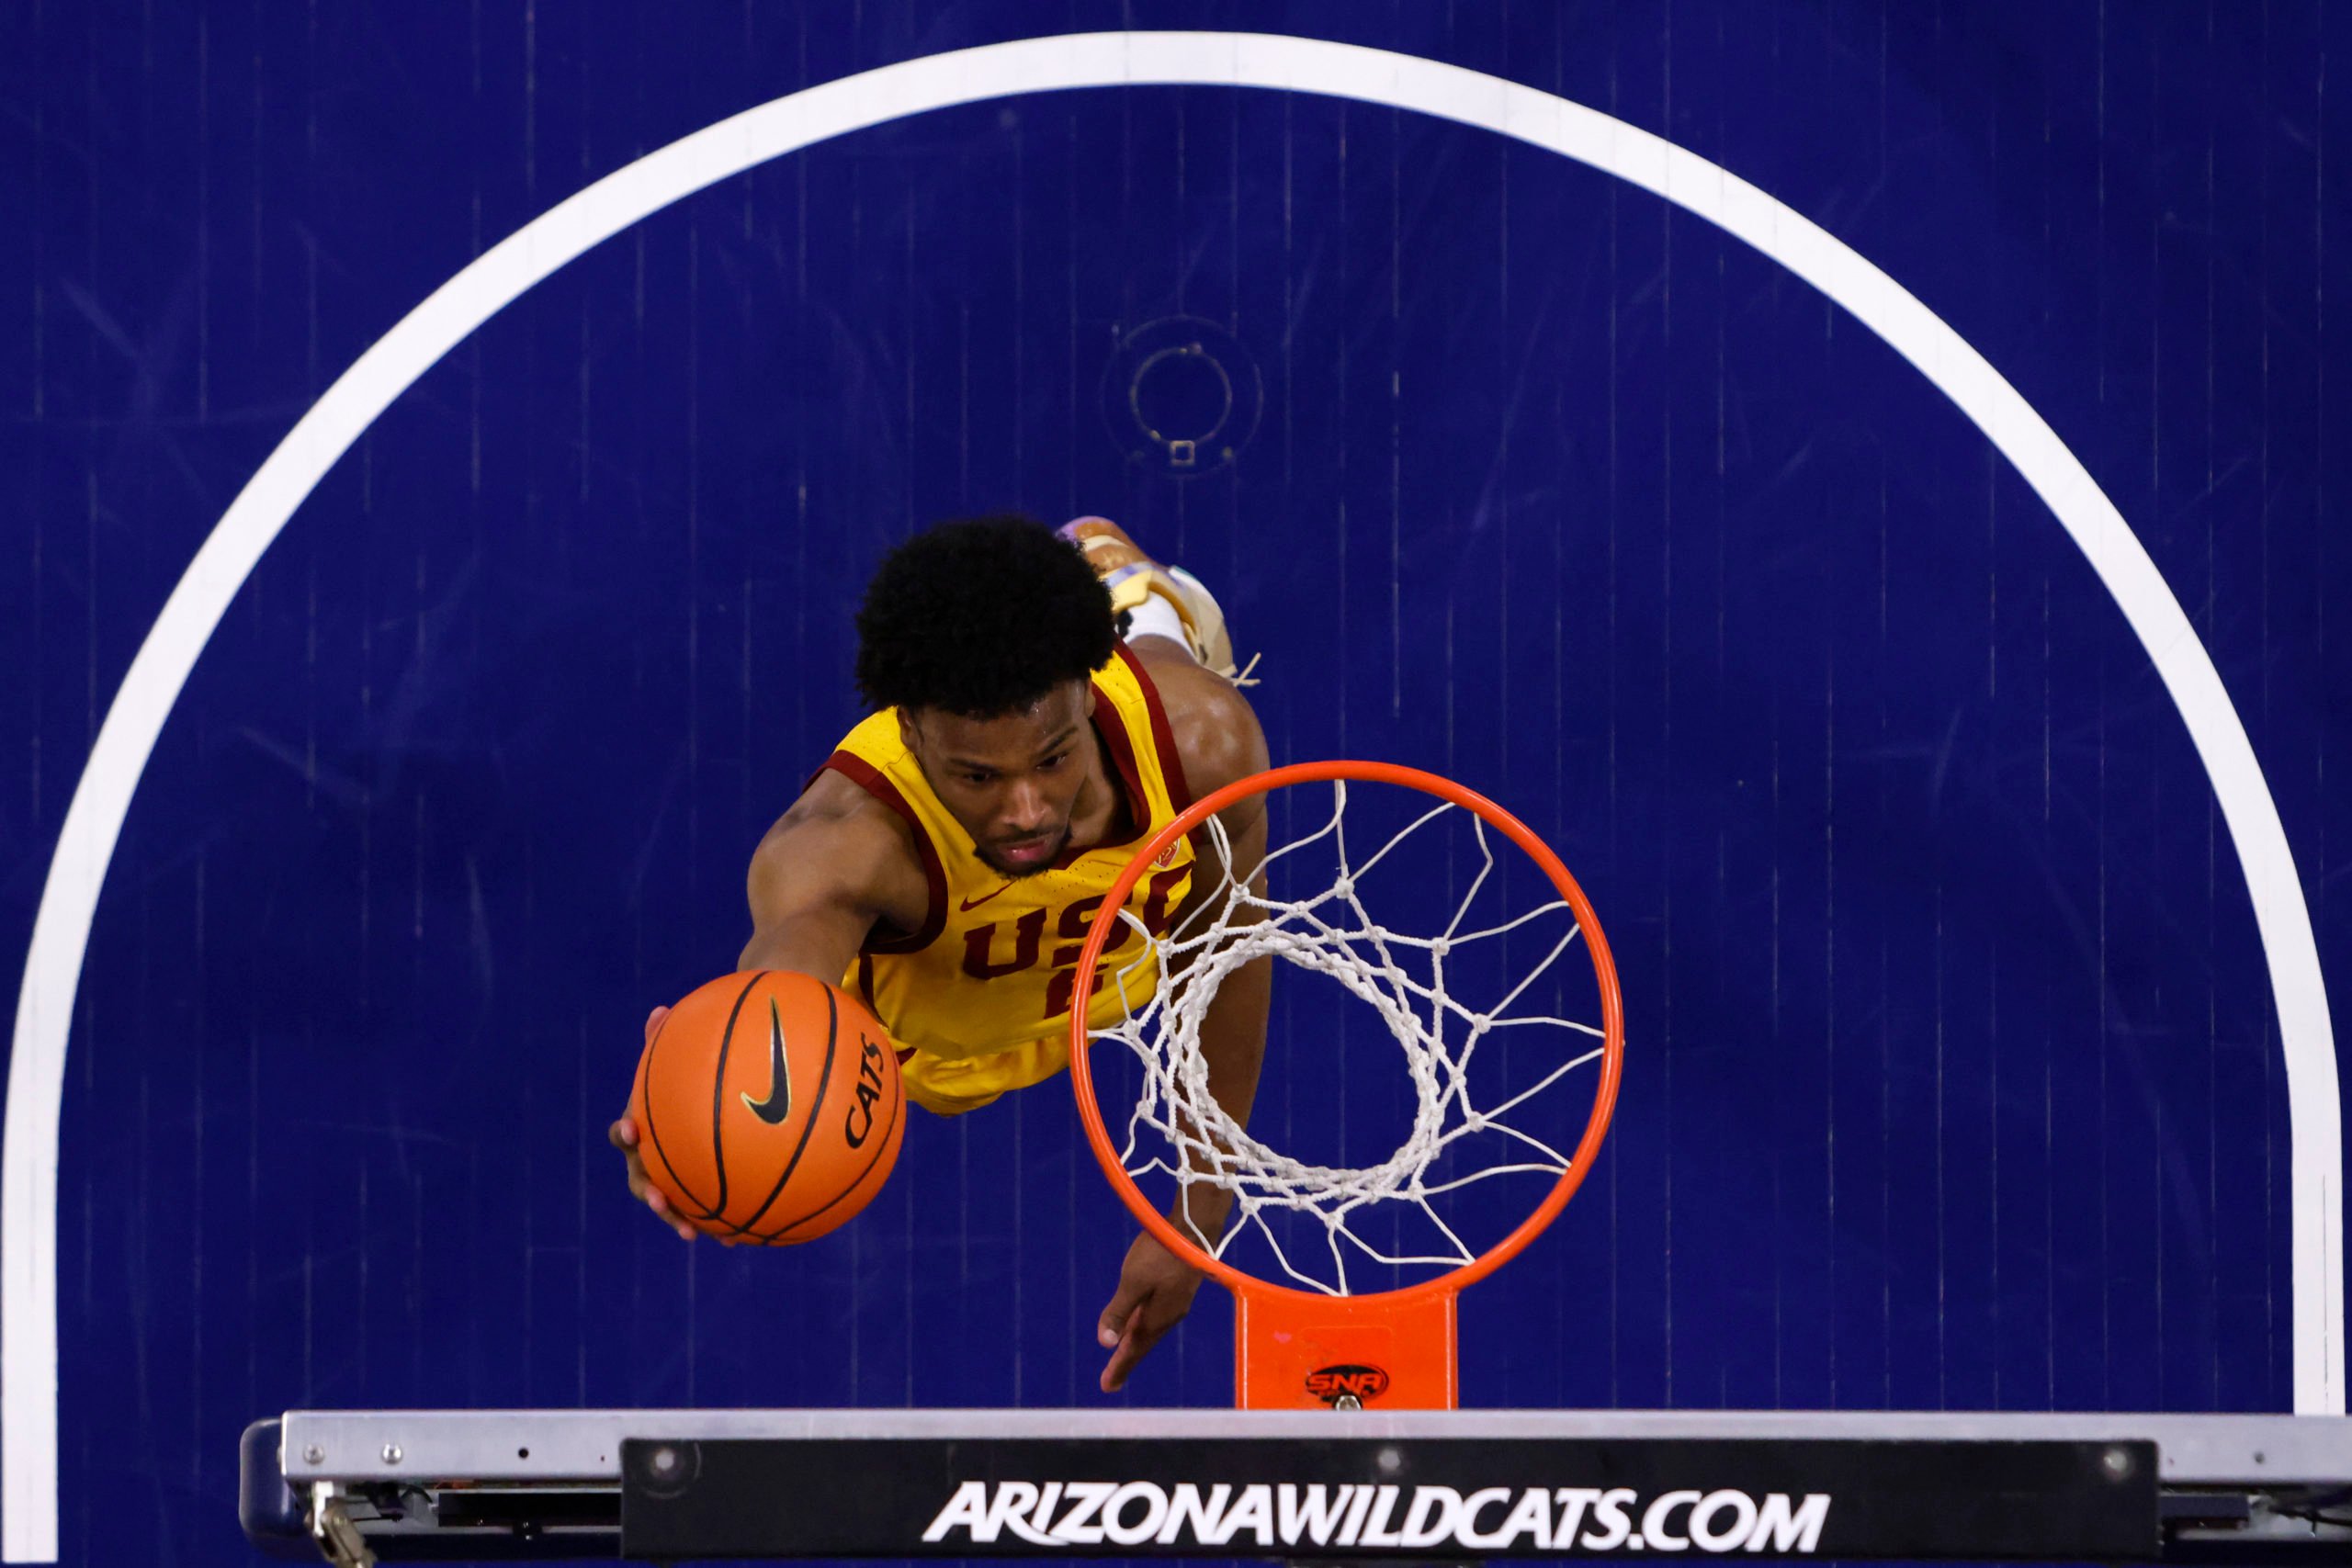 TUCSON, ARIZONA - JANUARY 17: Bronny James #6 of the USC Trojans attempts a layup during the first half against the Arizona Wildcats at McKale Center on January 17, 2024 in Tucson, Arizona. Chris Coduto/Getty Images